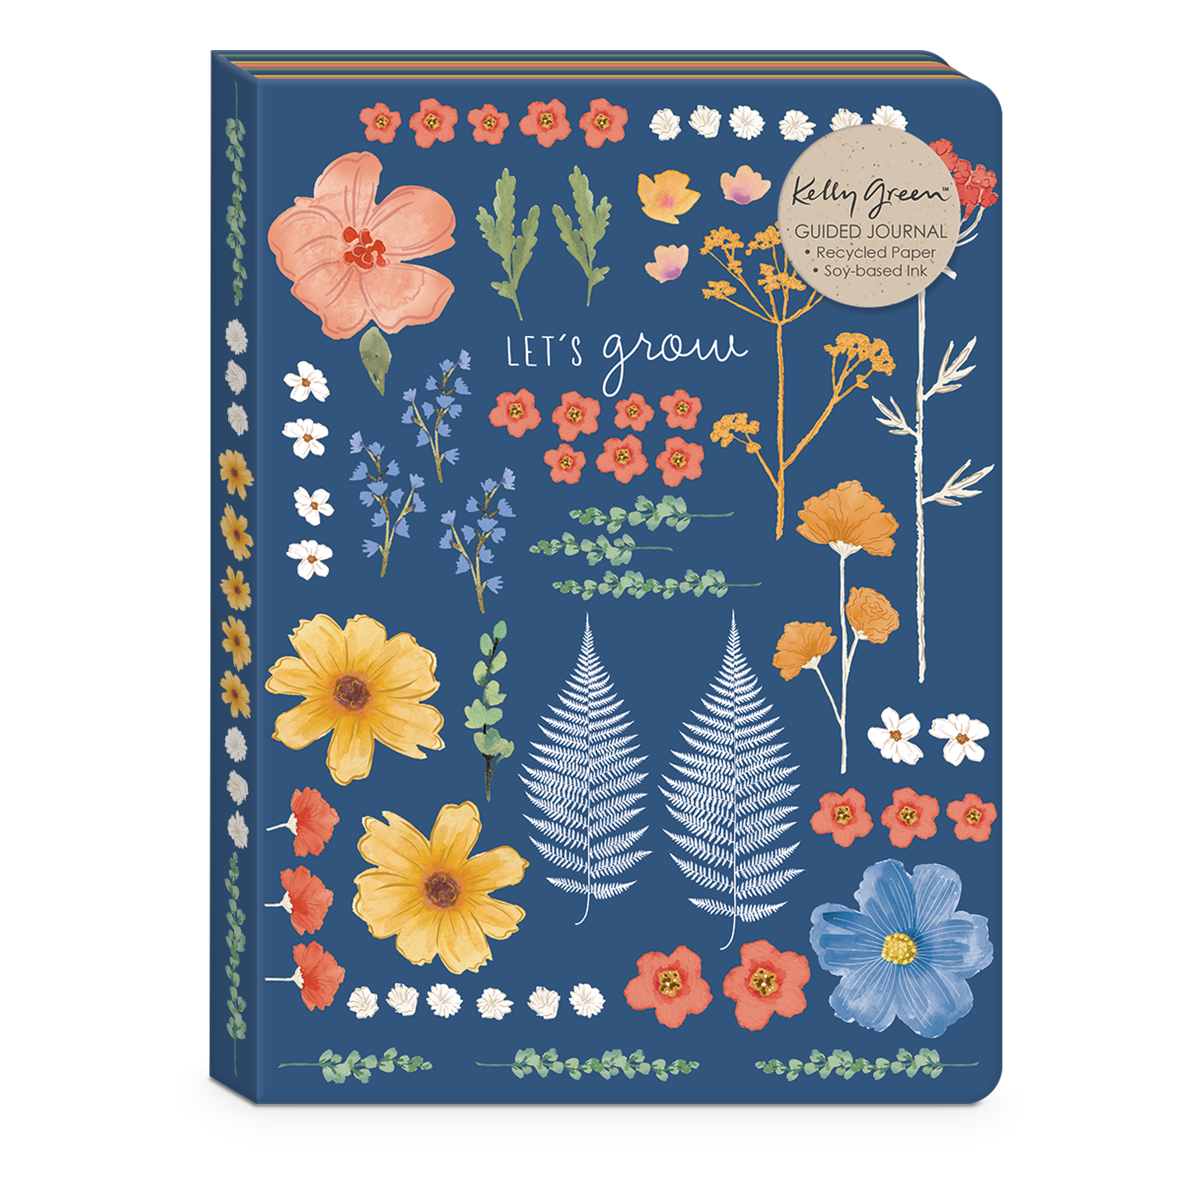 blue journal with floral design and "let's grow" printed in the center.